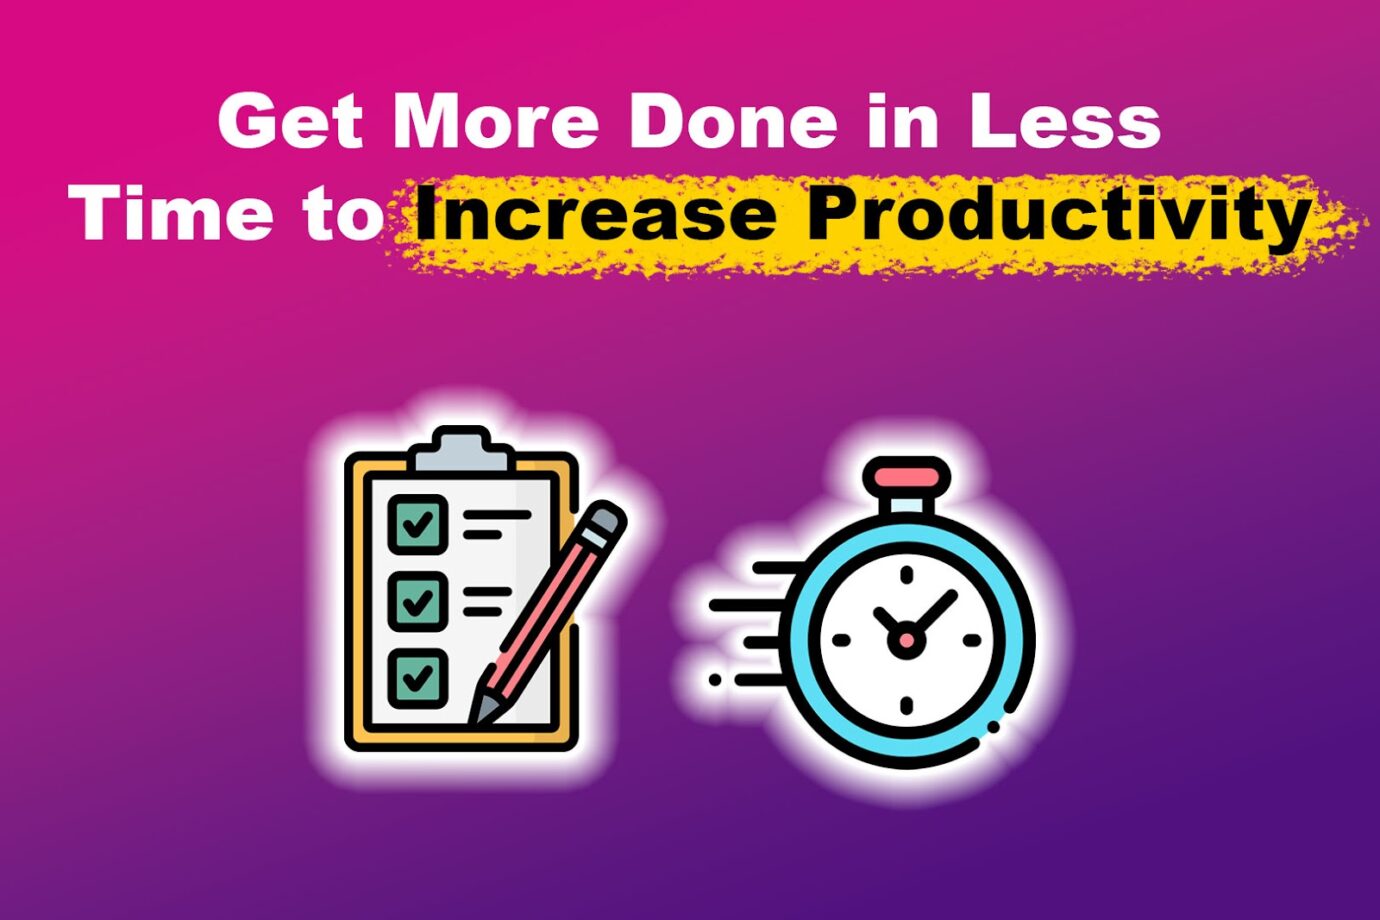 Get More Done in Less Time to Increase Productivity